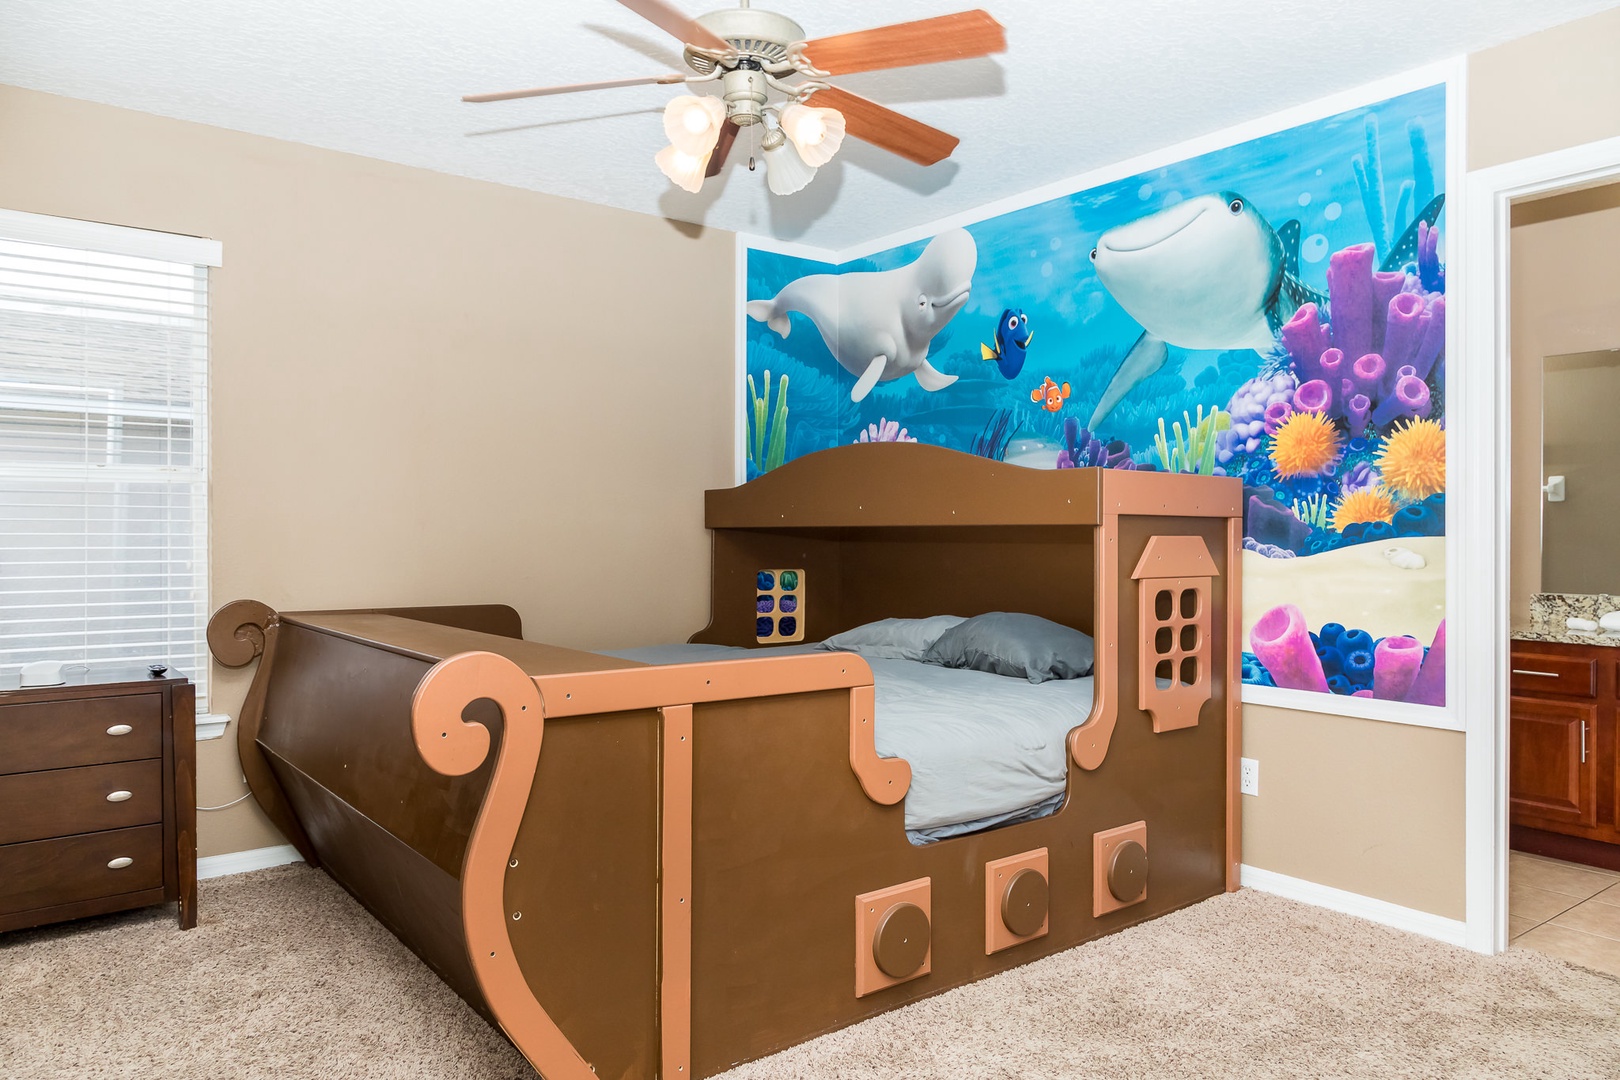 Who doesn't love sleeping under the sea?